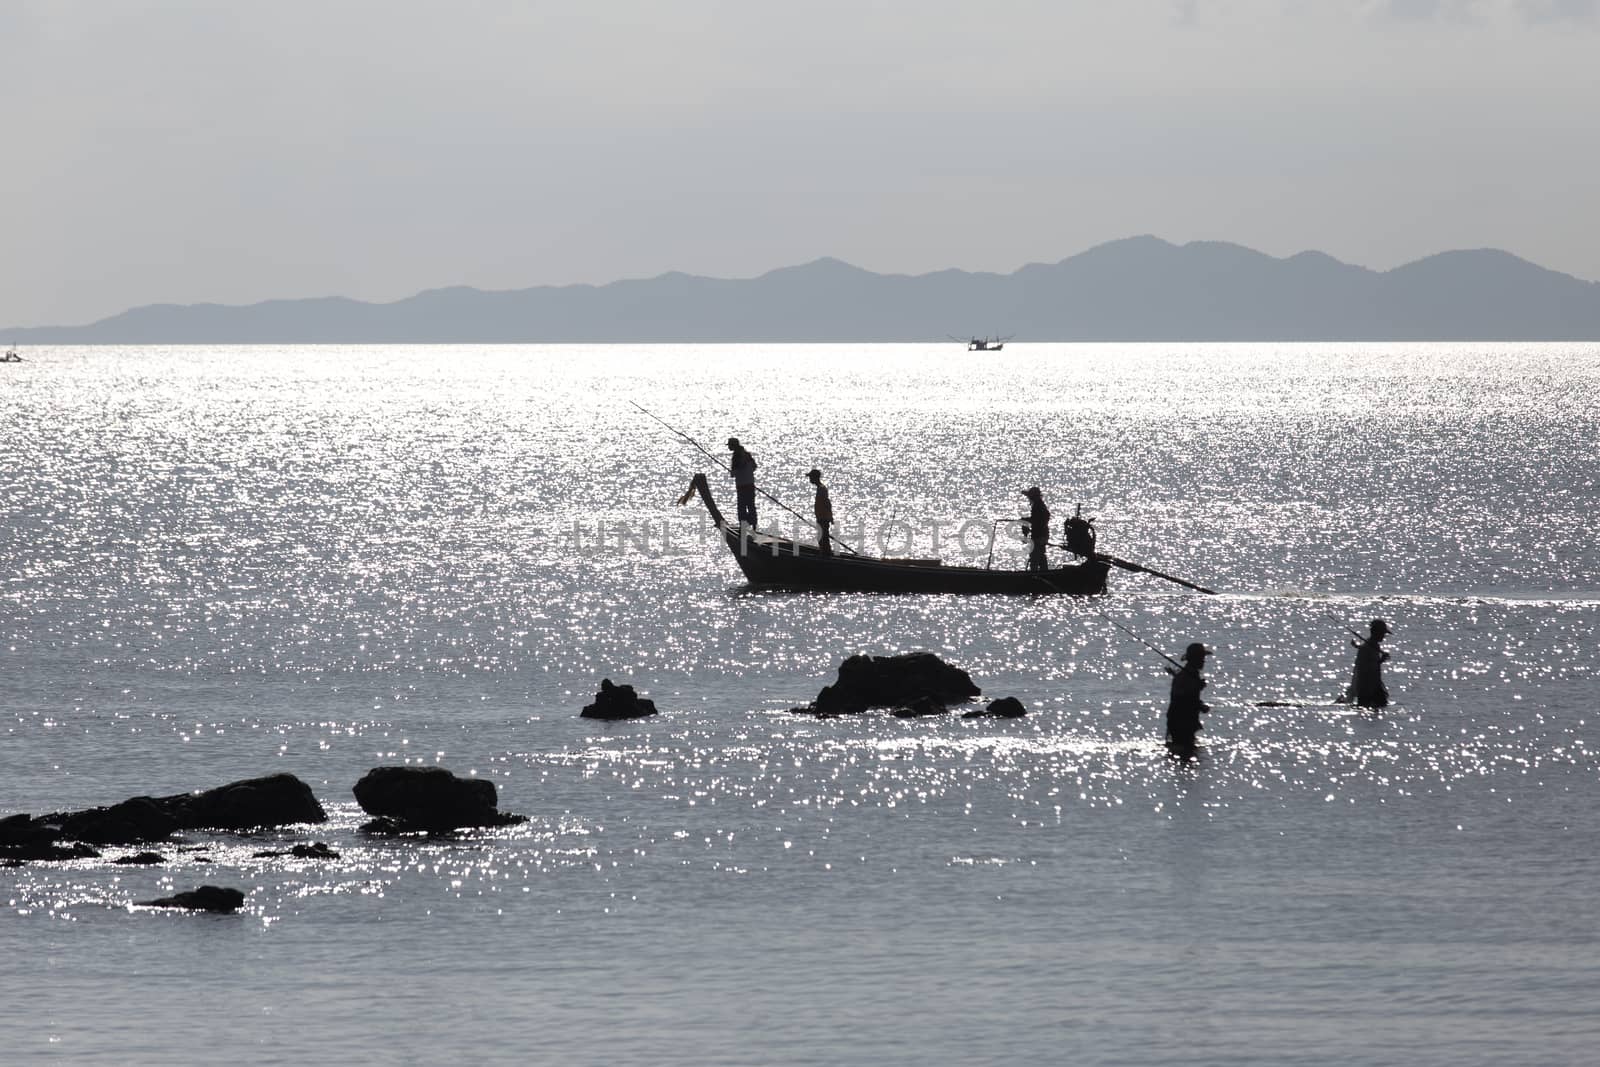 Krabi Thailand 12.16.2015 looking out to sea with fishermen silhouetted by silver sea. High quality photo